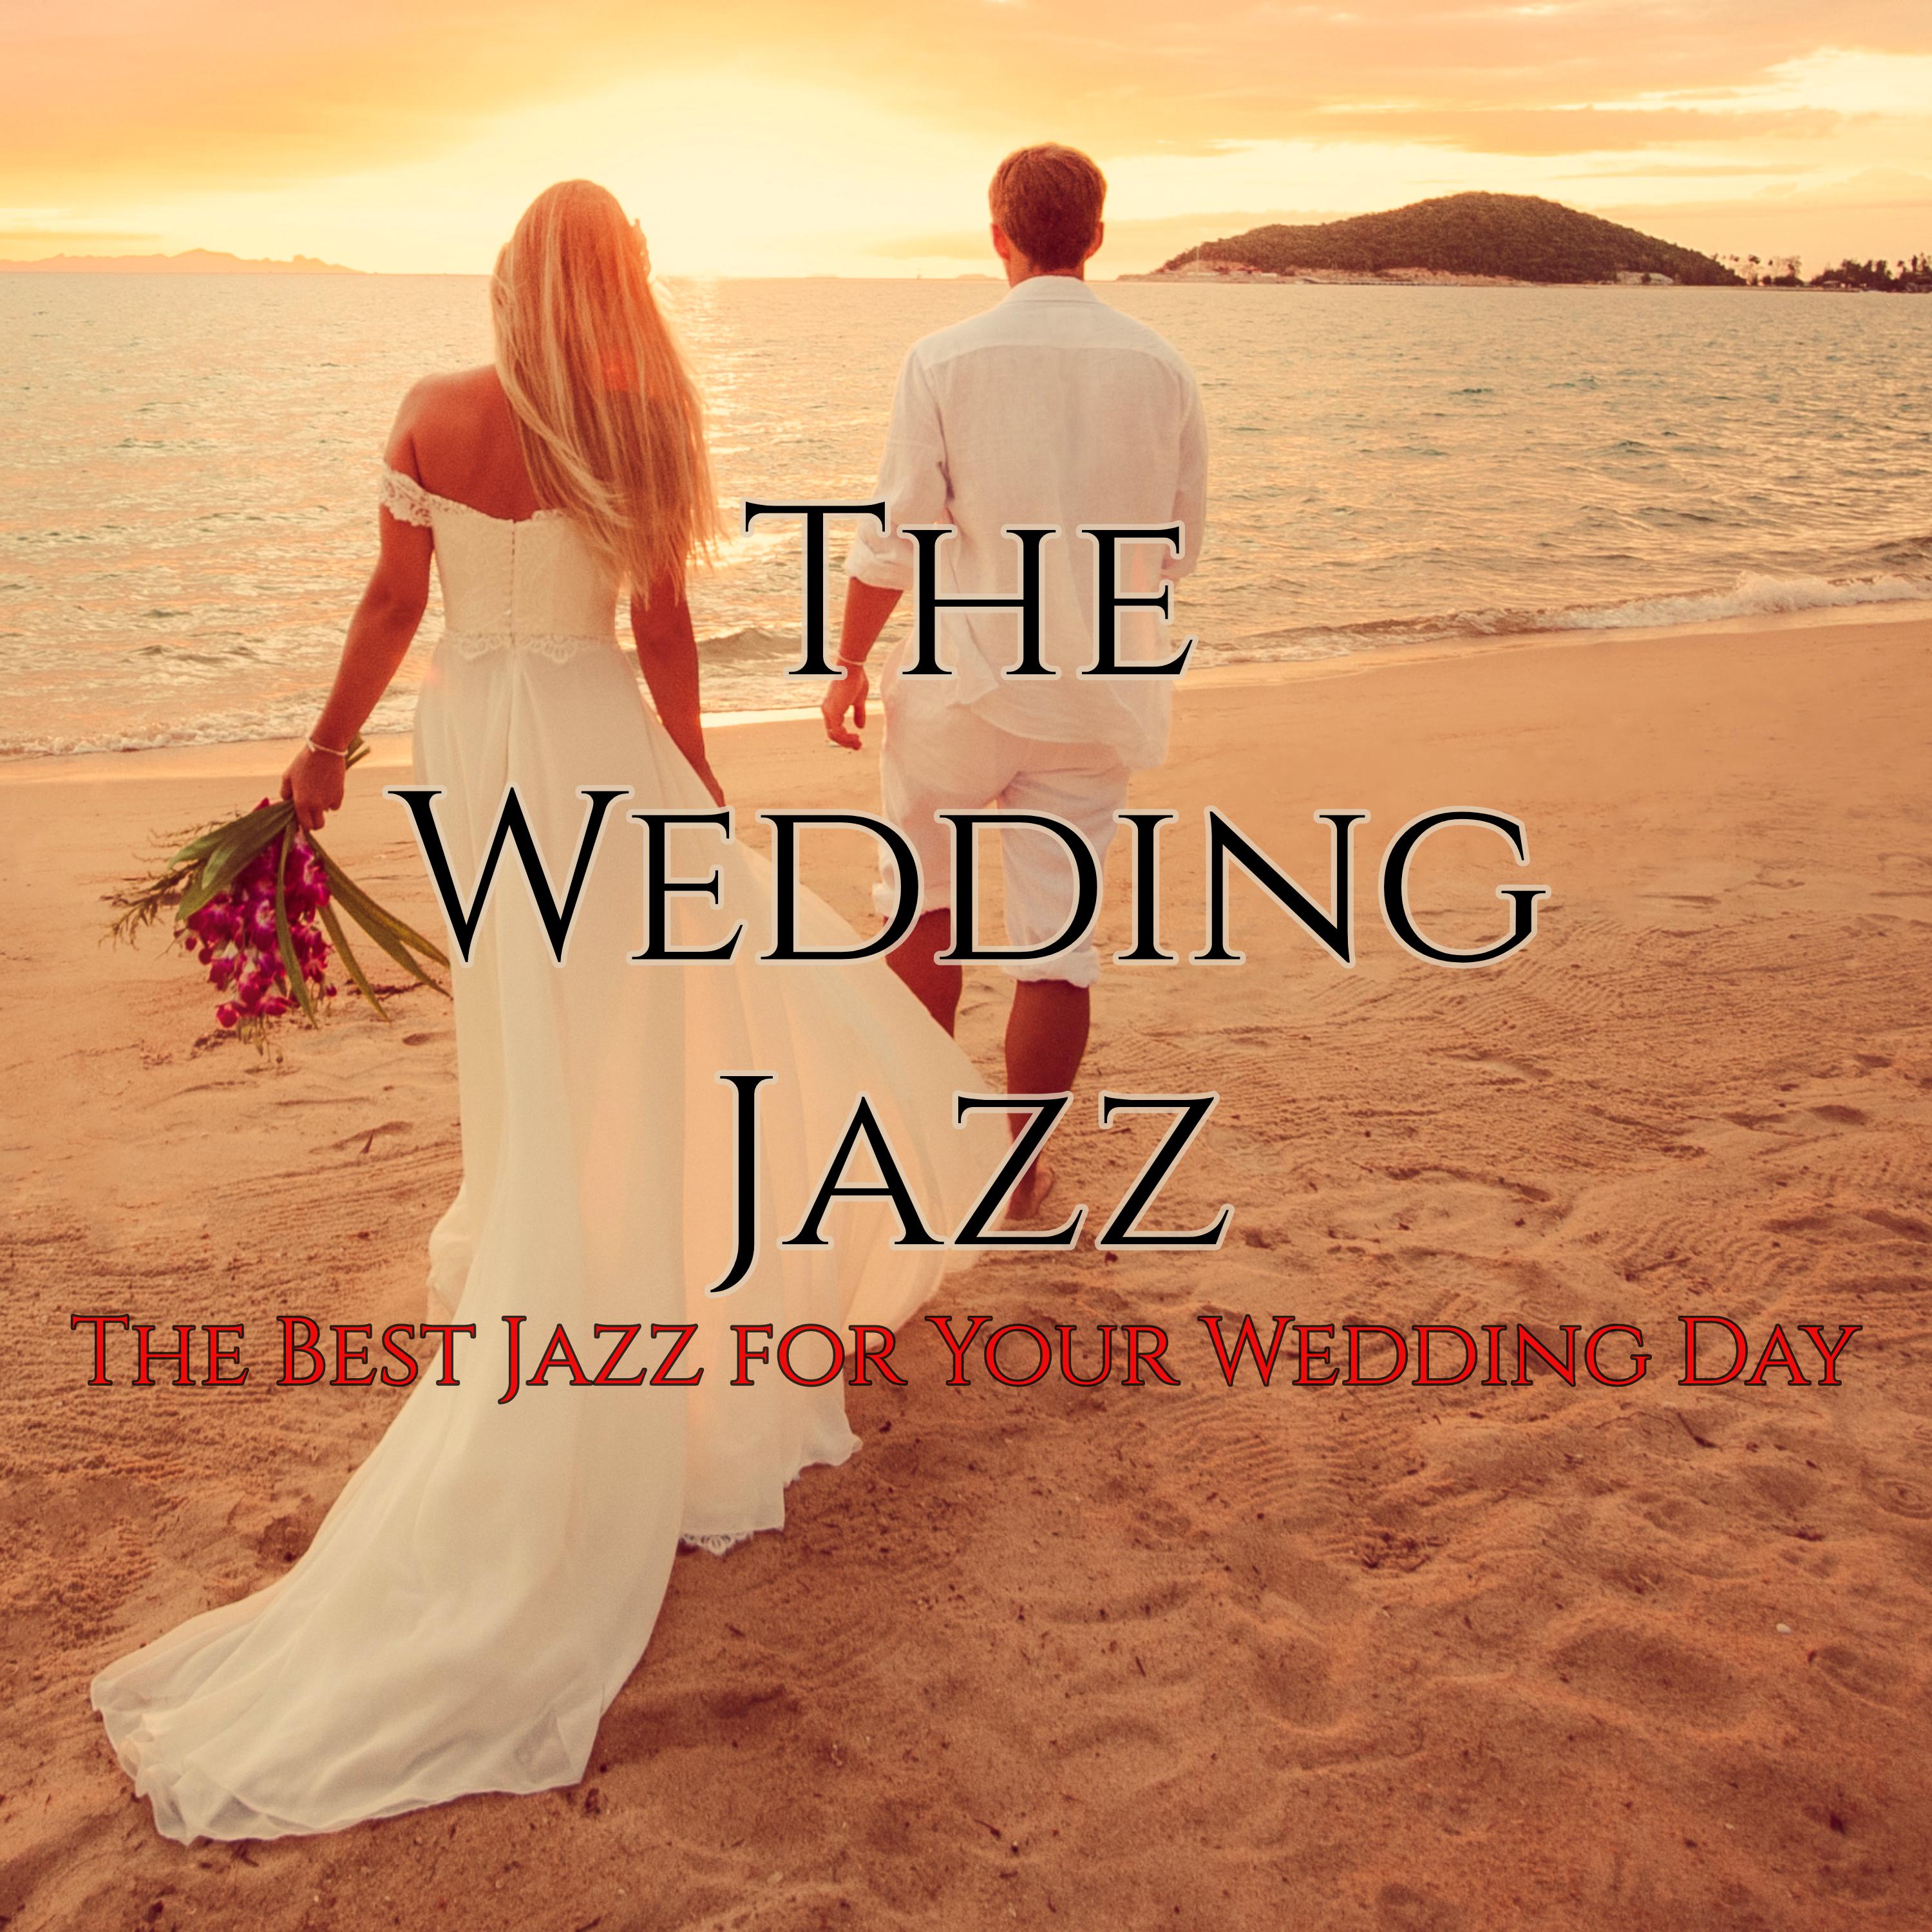 The Wedding Jazz – The Best Jazz for Your Wedding Day